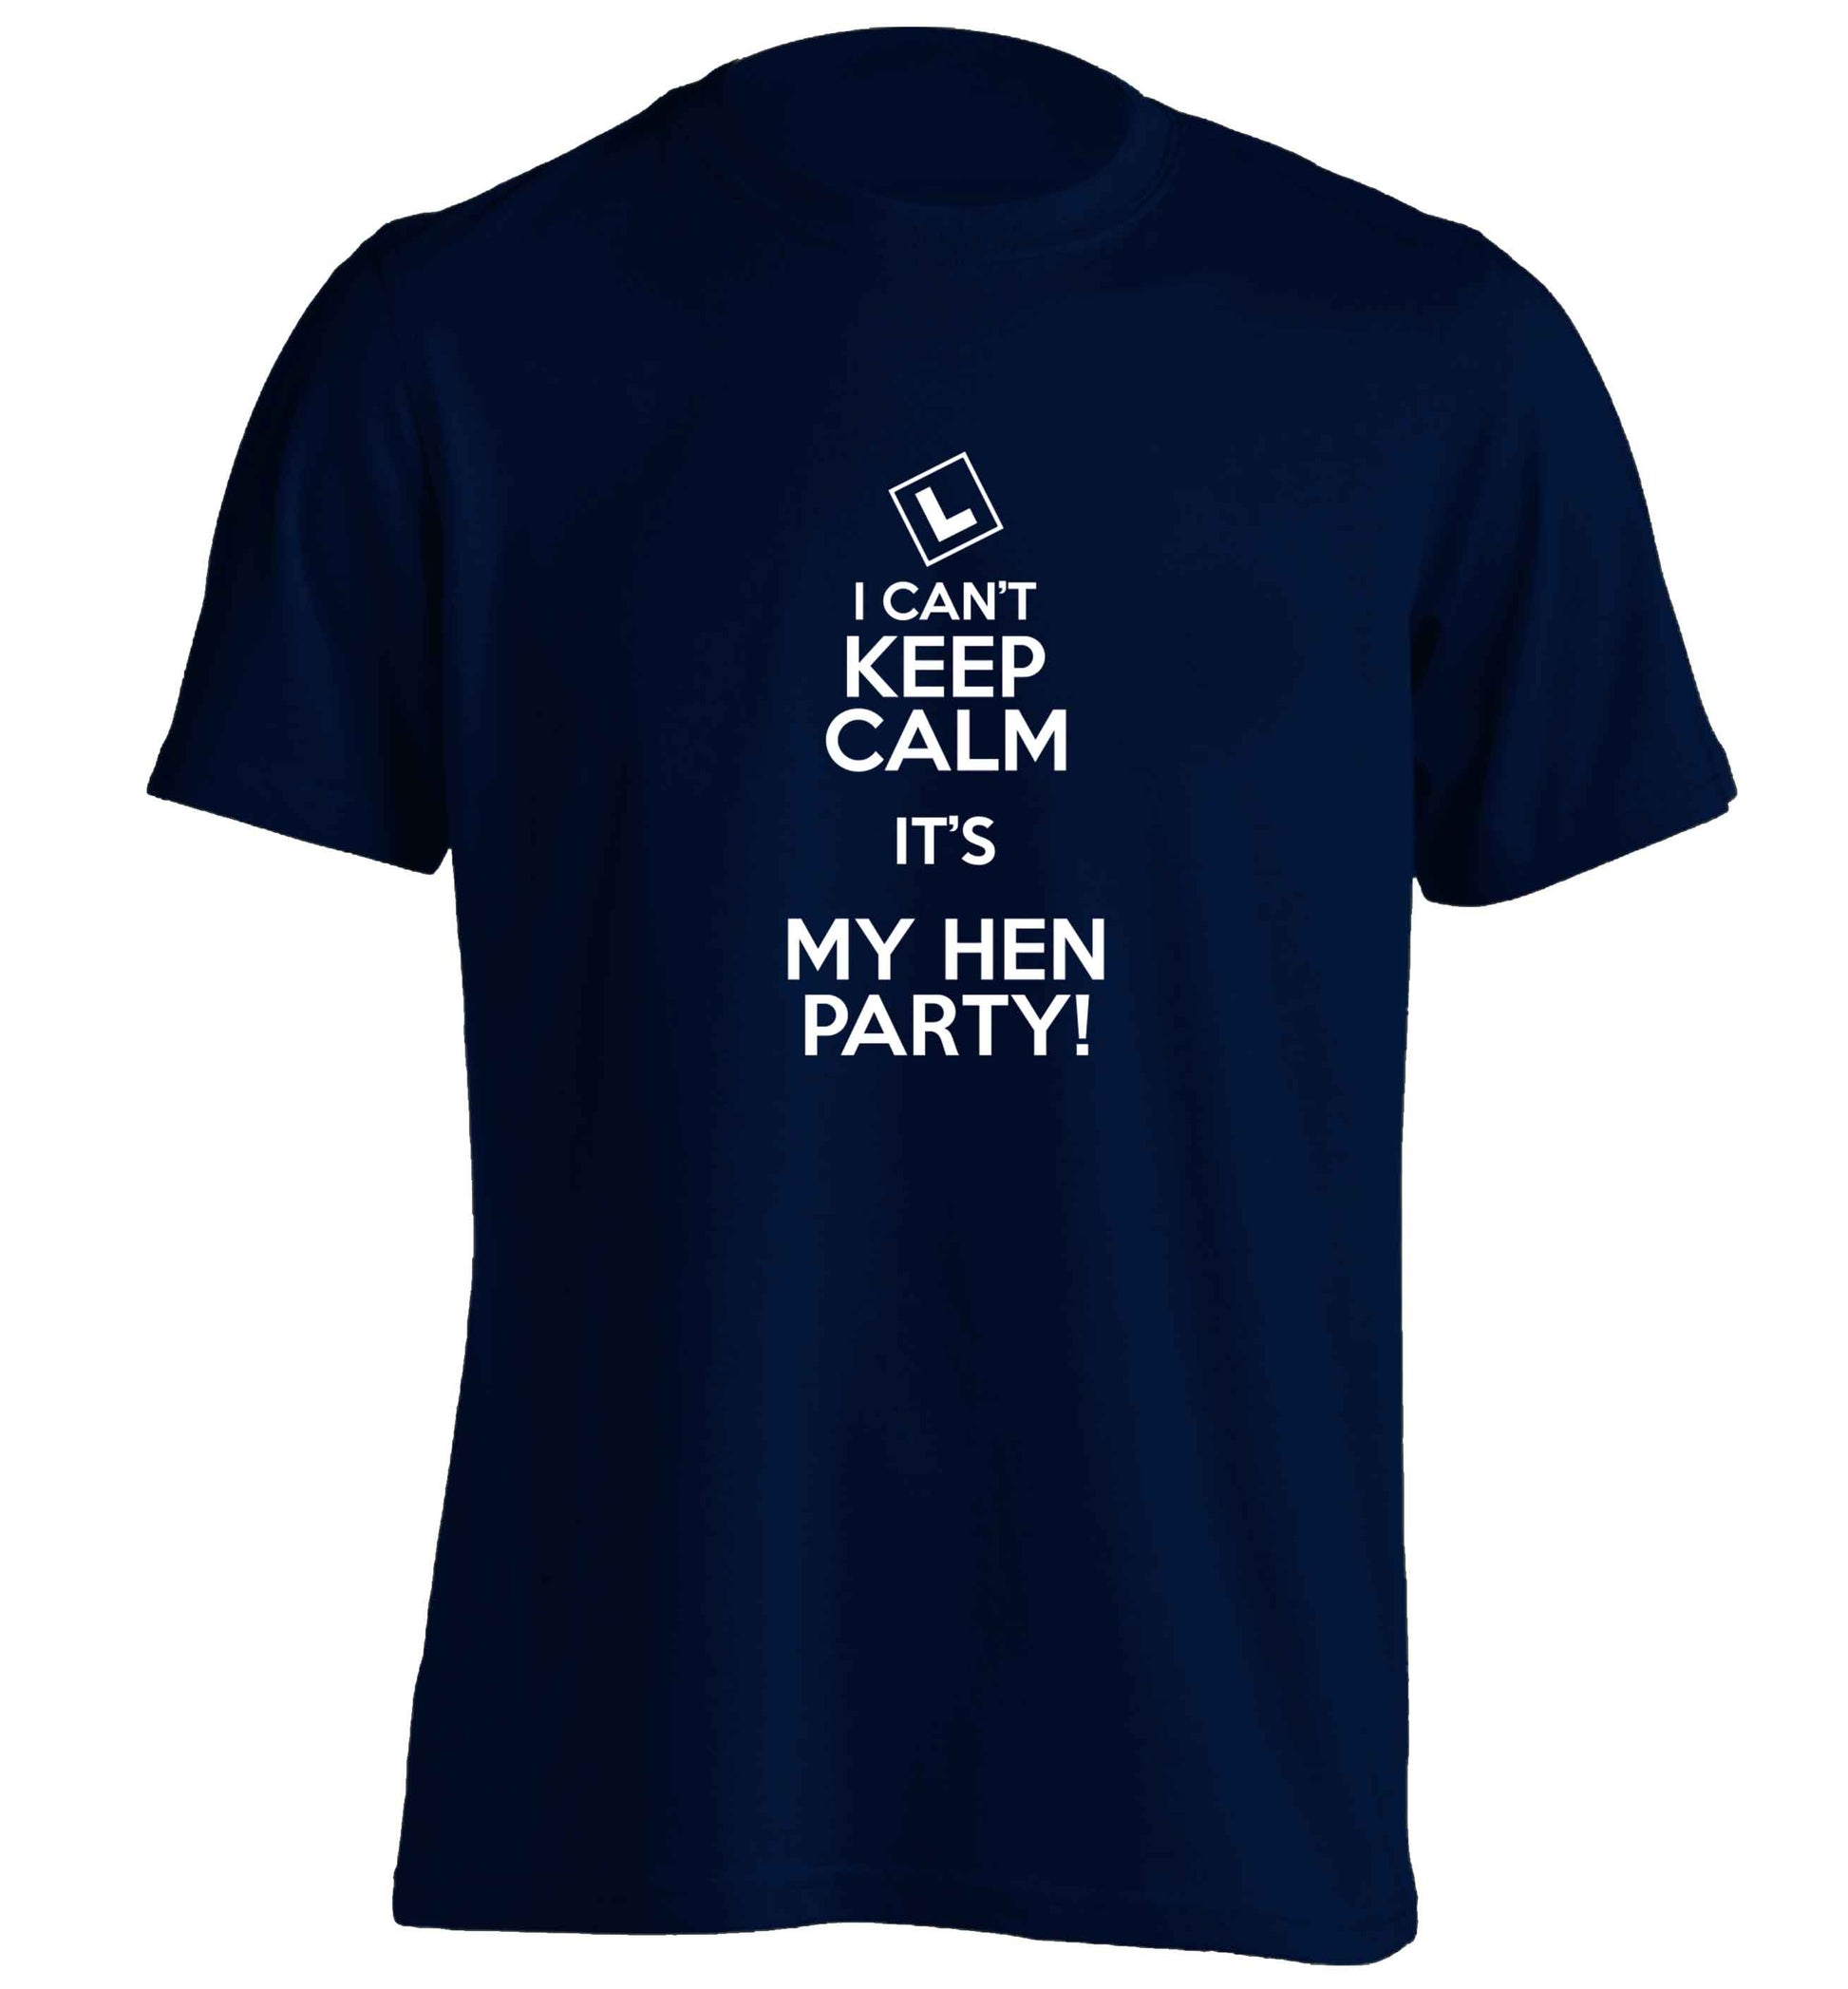 I can't keep calm it's my hen party adults unisex navy Tshirt 2XL